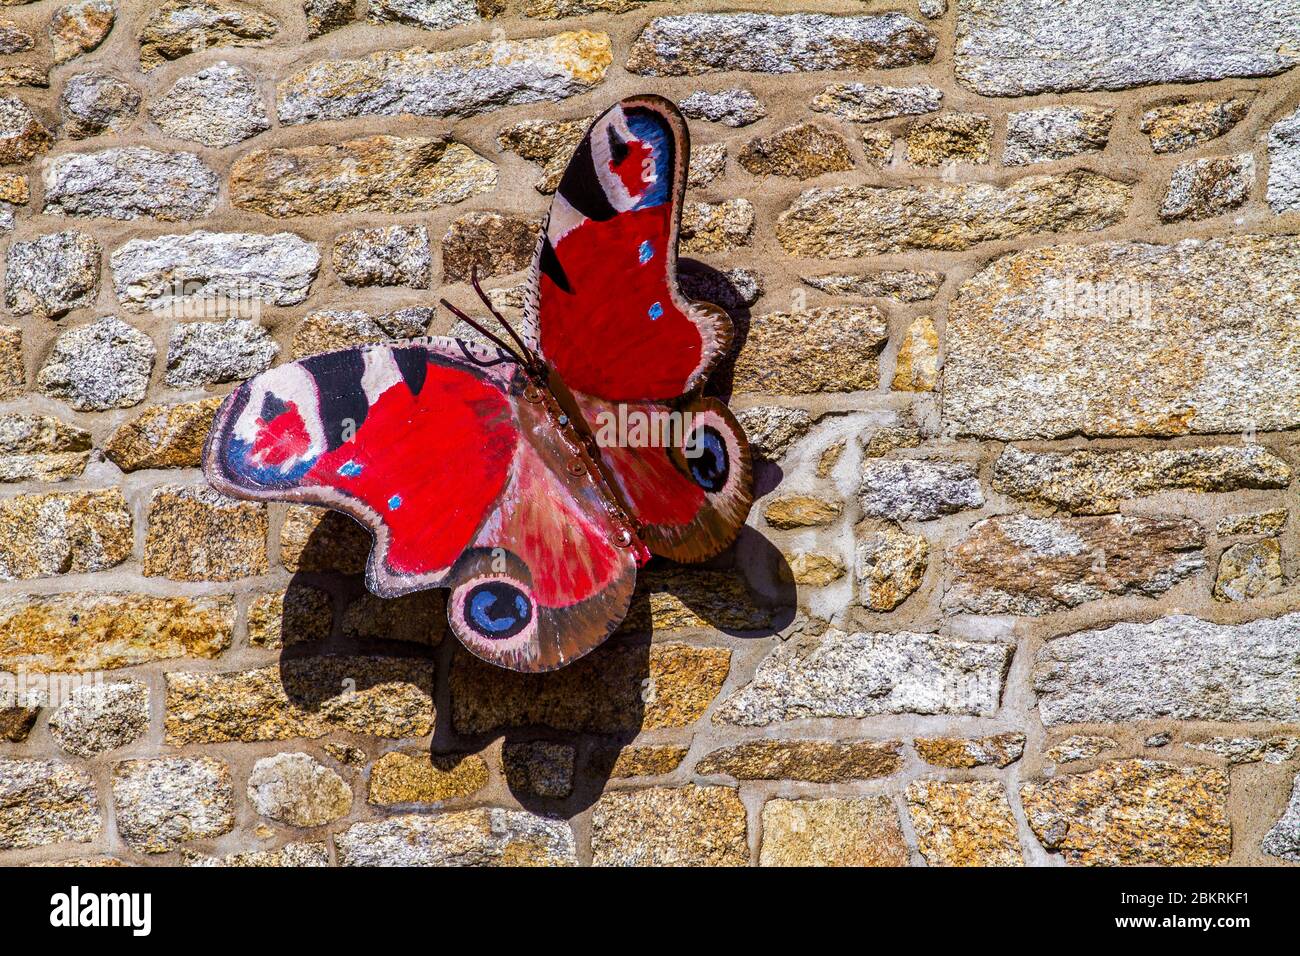 France, Morbihan, La Vraie Croix, Exhibition on the theme of insects and critters Stock Photo